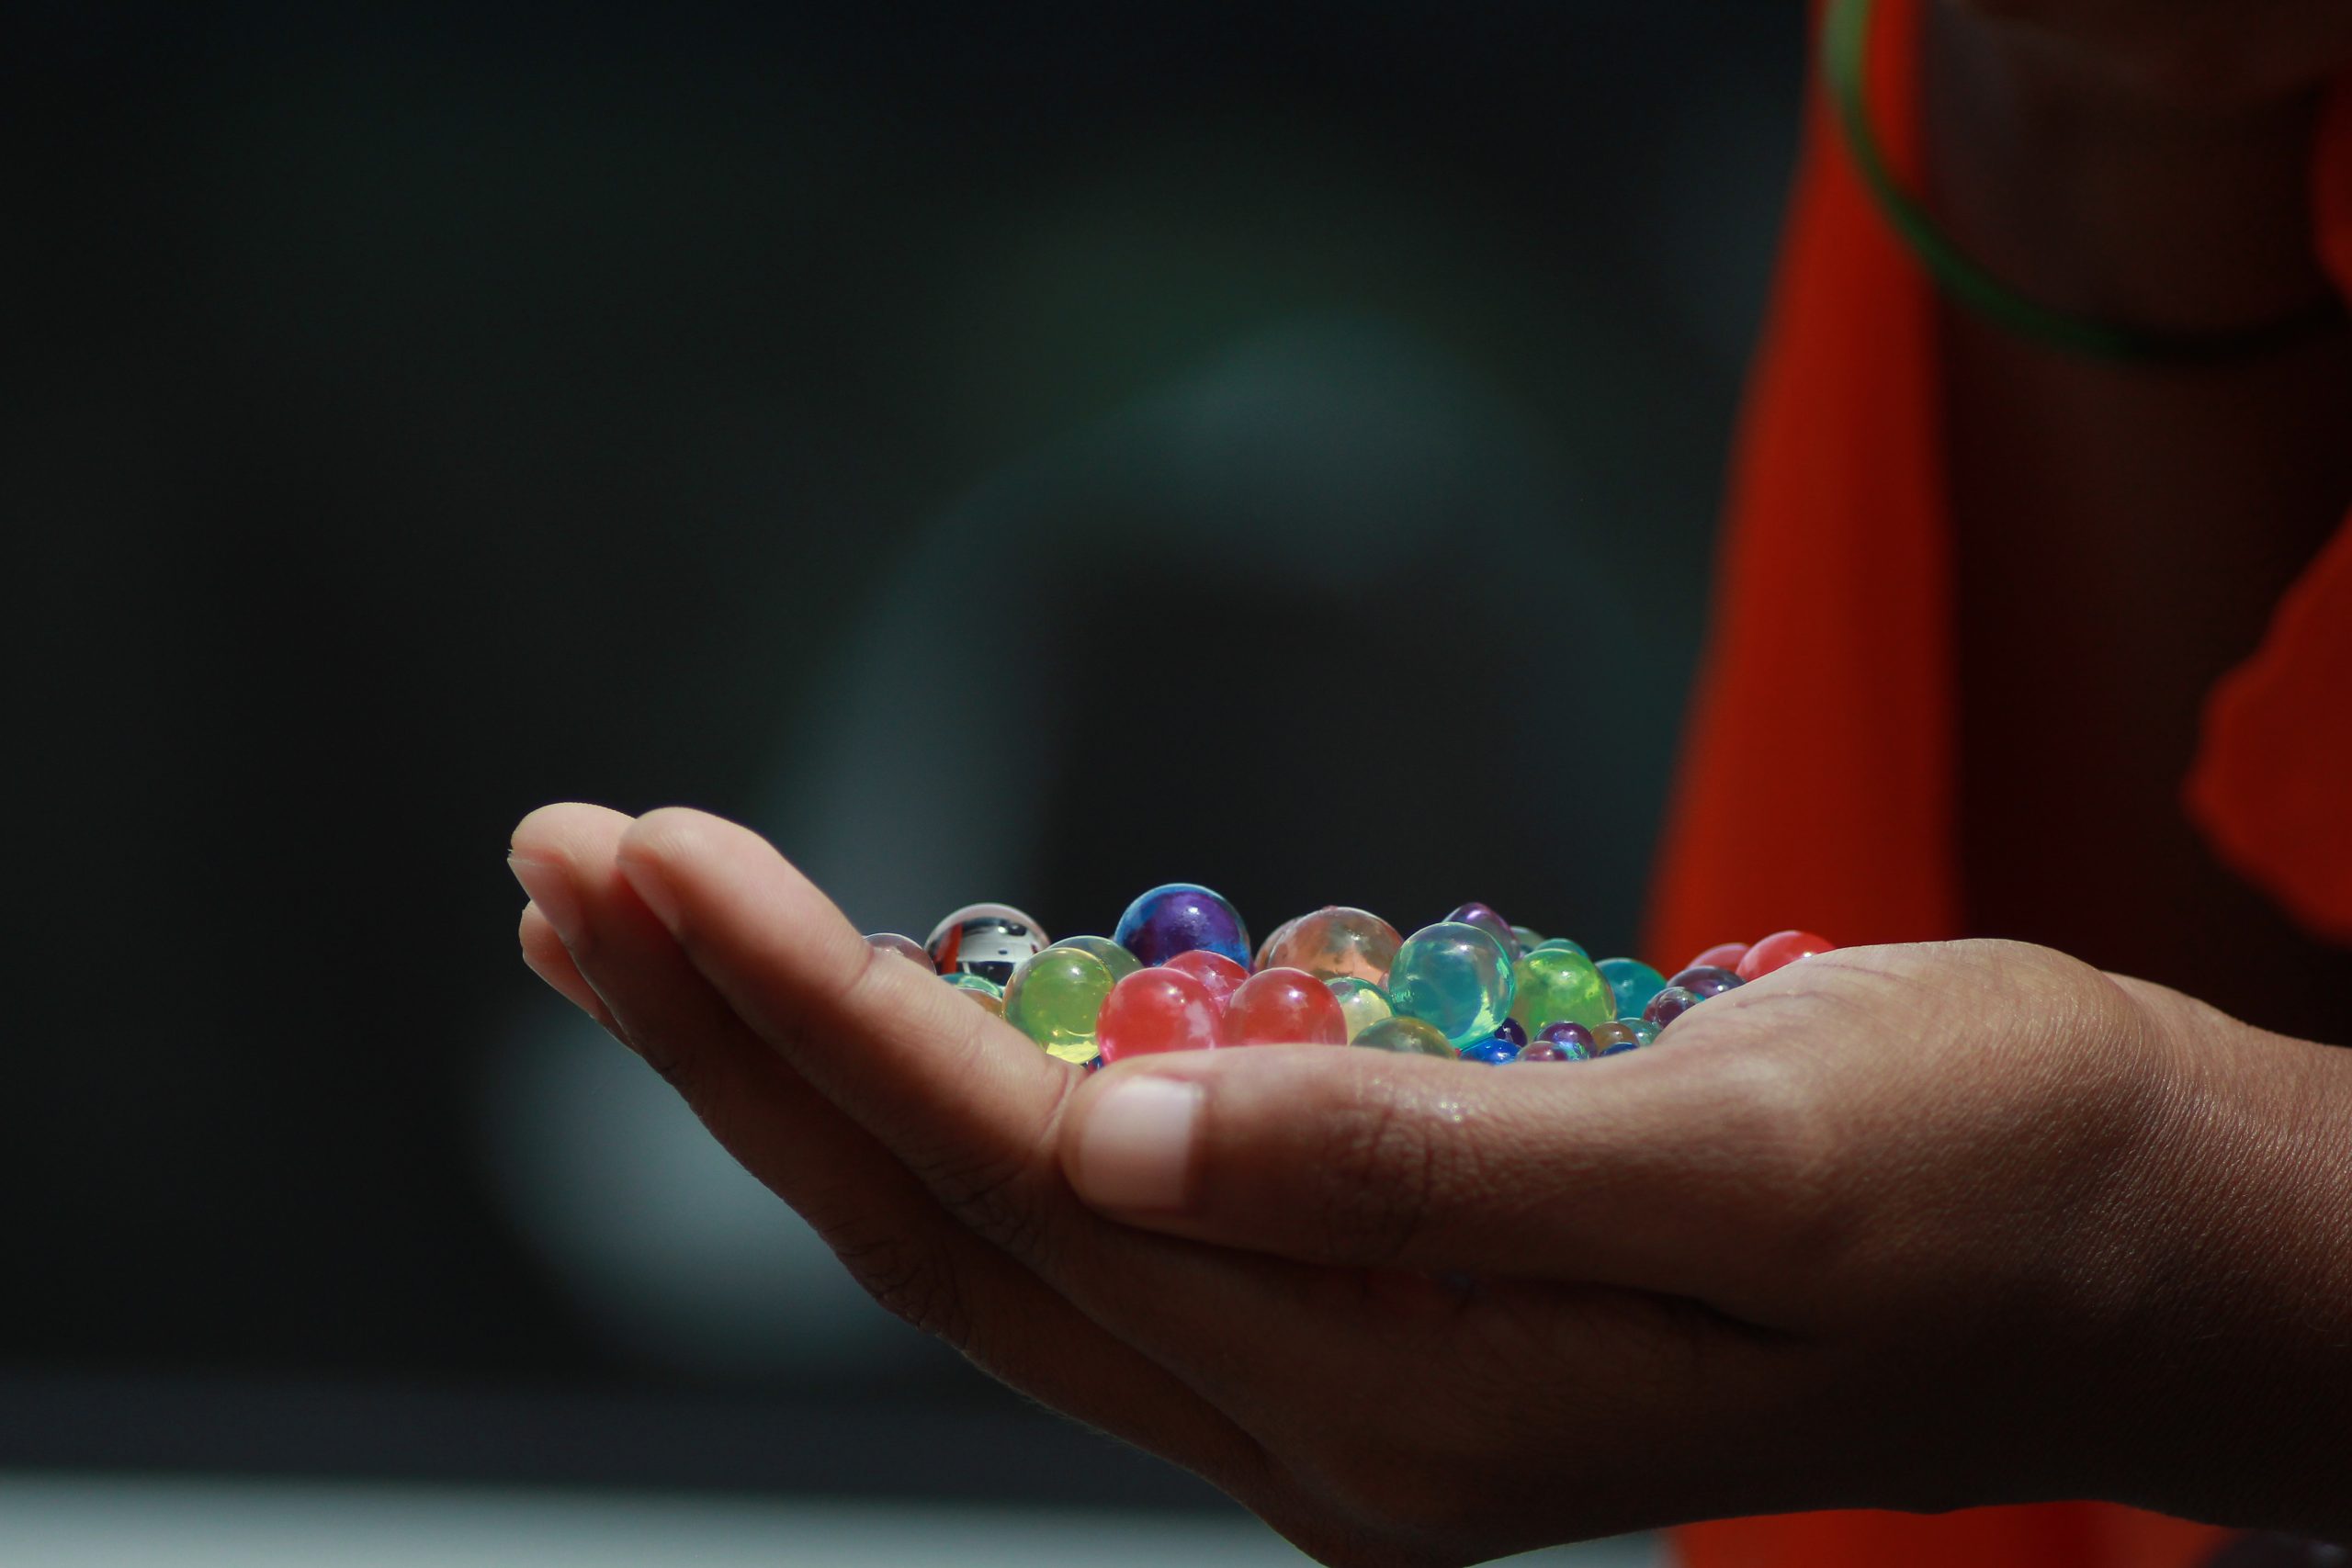 Glass marbles in hand